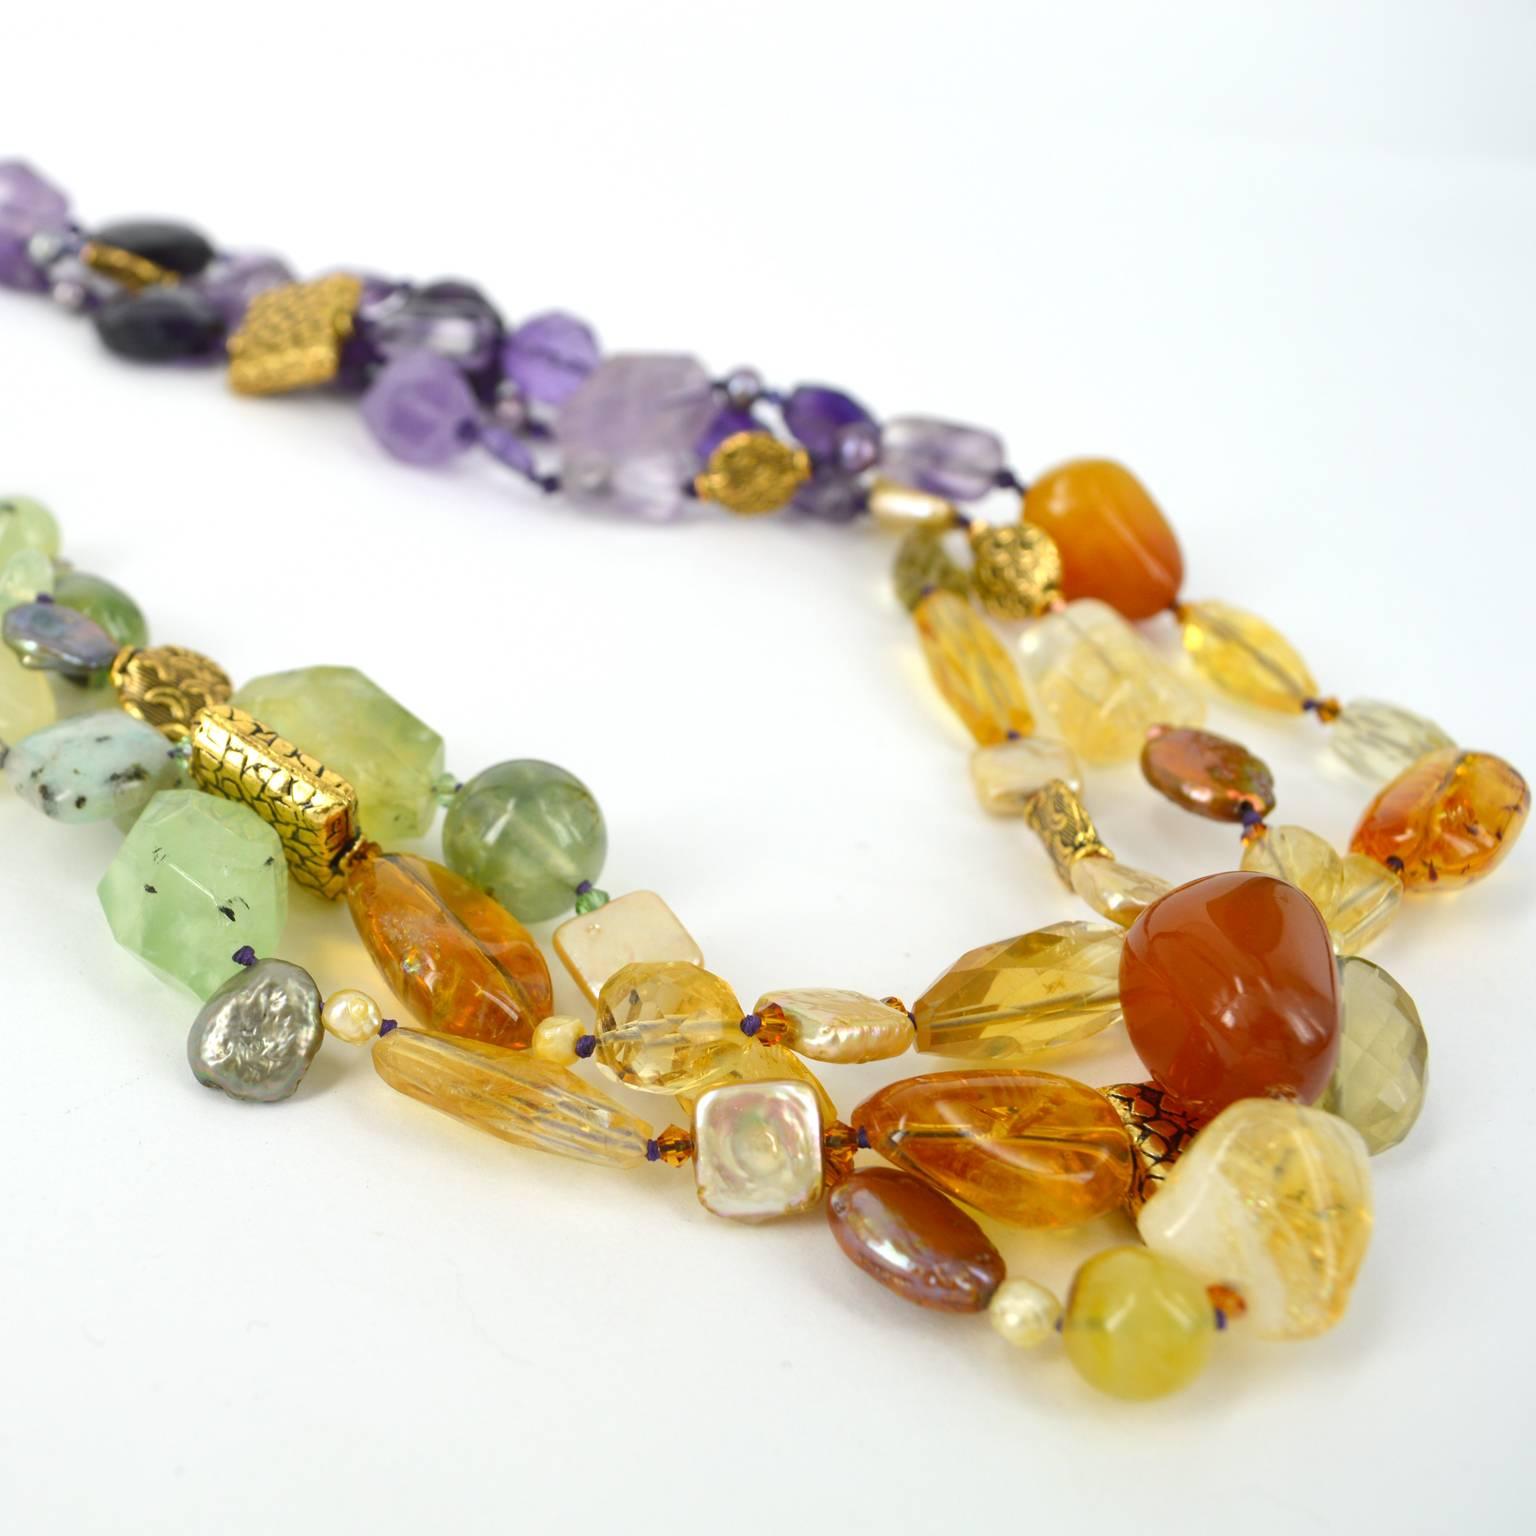 Graduating from vibrant Amethyst to Citrine mixed with Carnelian, to finish with the soft tones of Prehnite with Chalcedony, Kiwi stone and Jade this whole design is augmented with dyed Fresh Water Pearls, 3mm Swarovski Beads and antiqued Gold plate